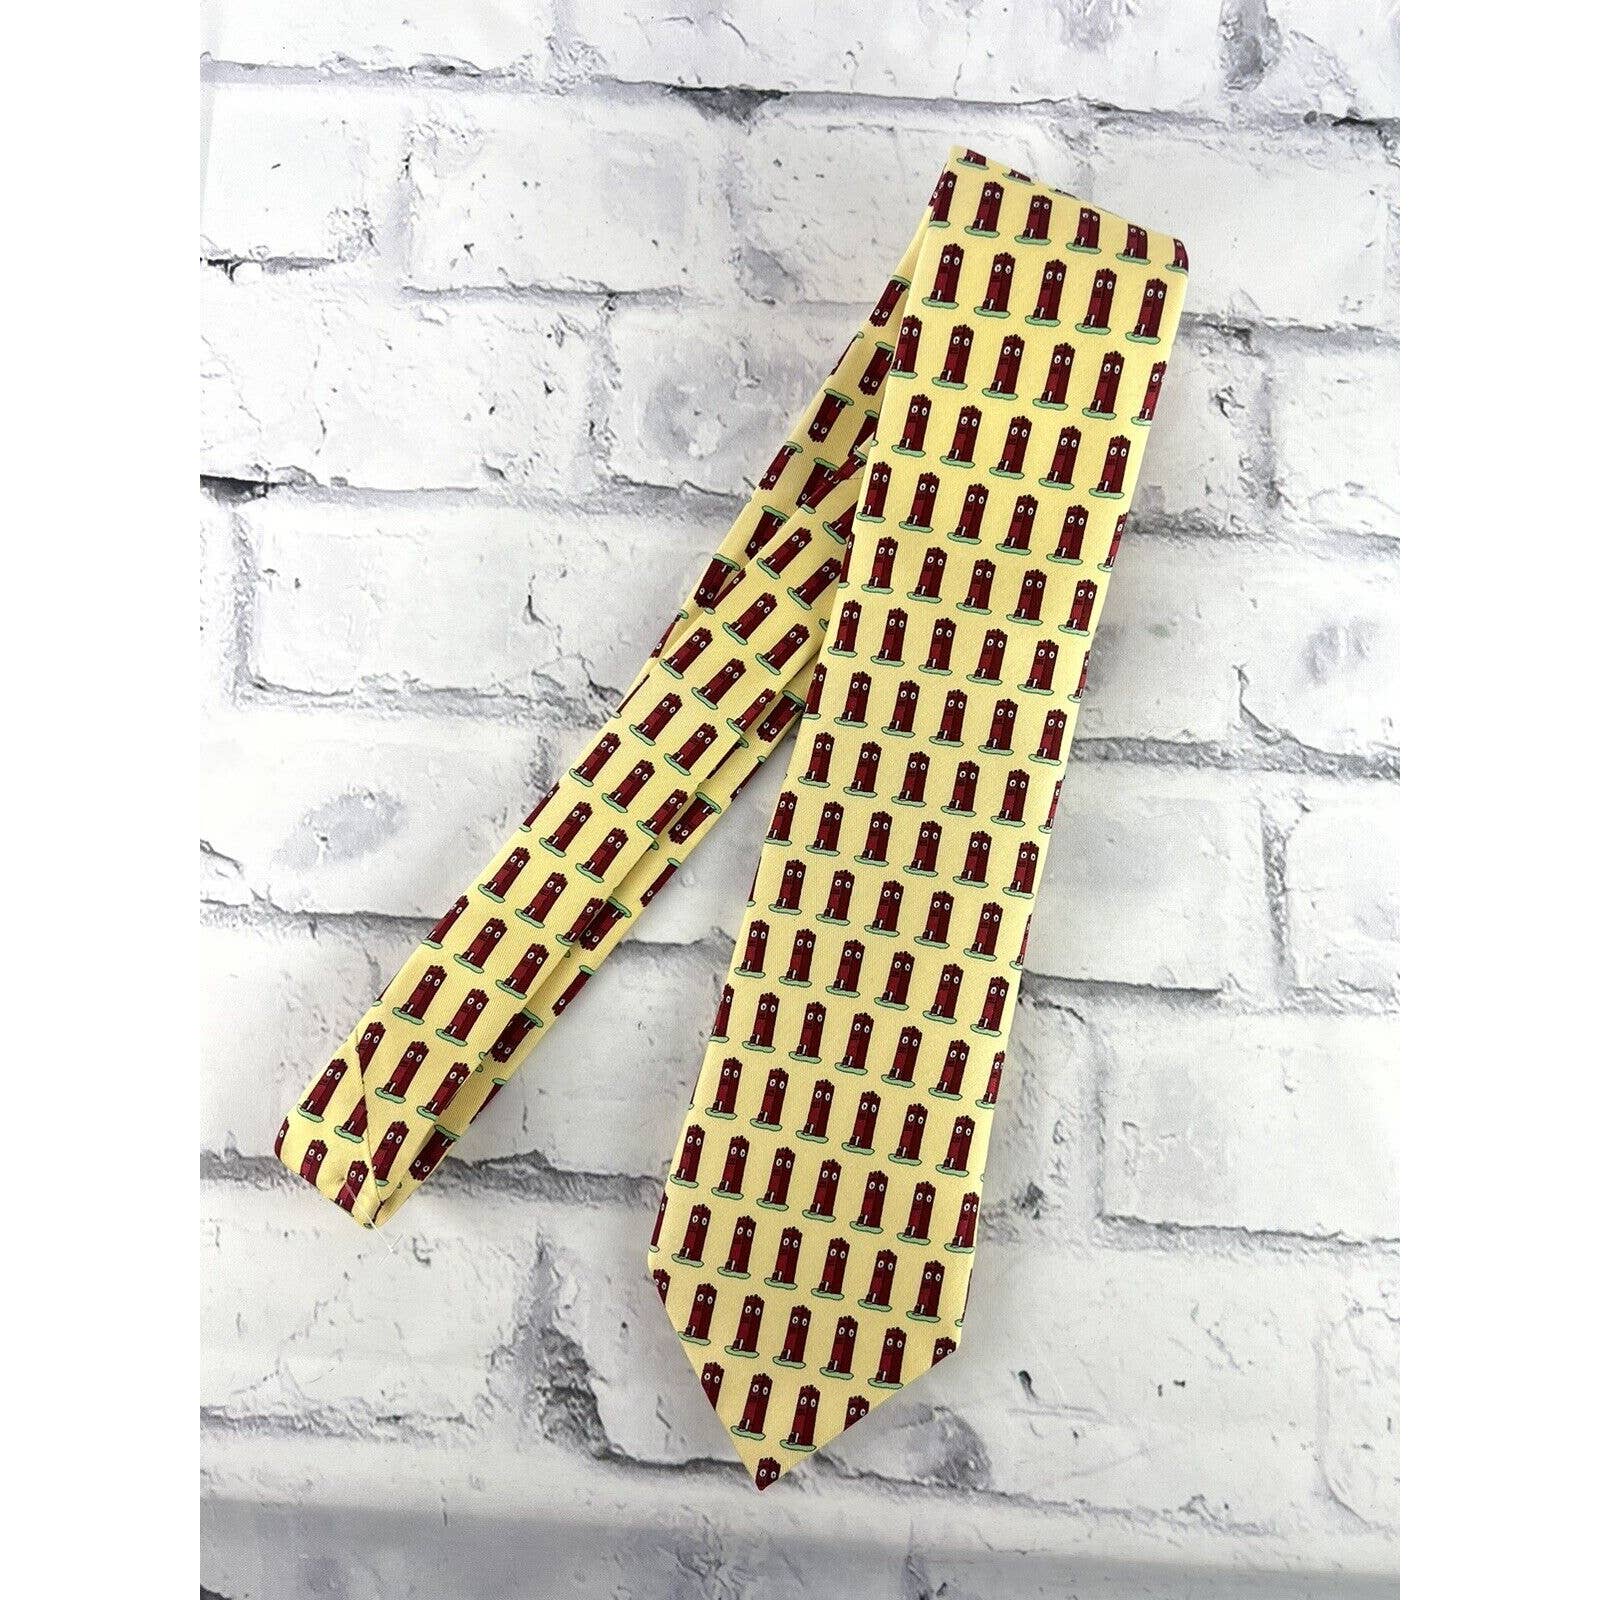 Vineyard Vines Custom Collections Silk Tie Clock Towers Yellow And Red 59”x3.5”